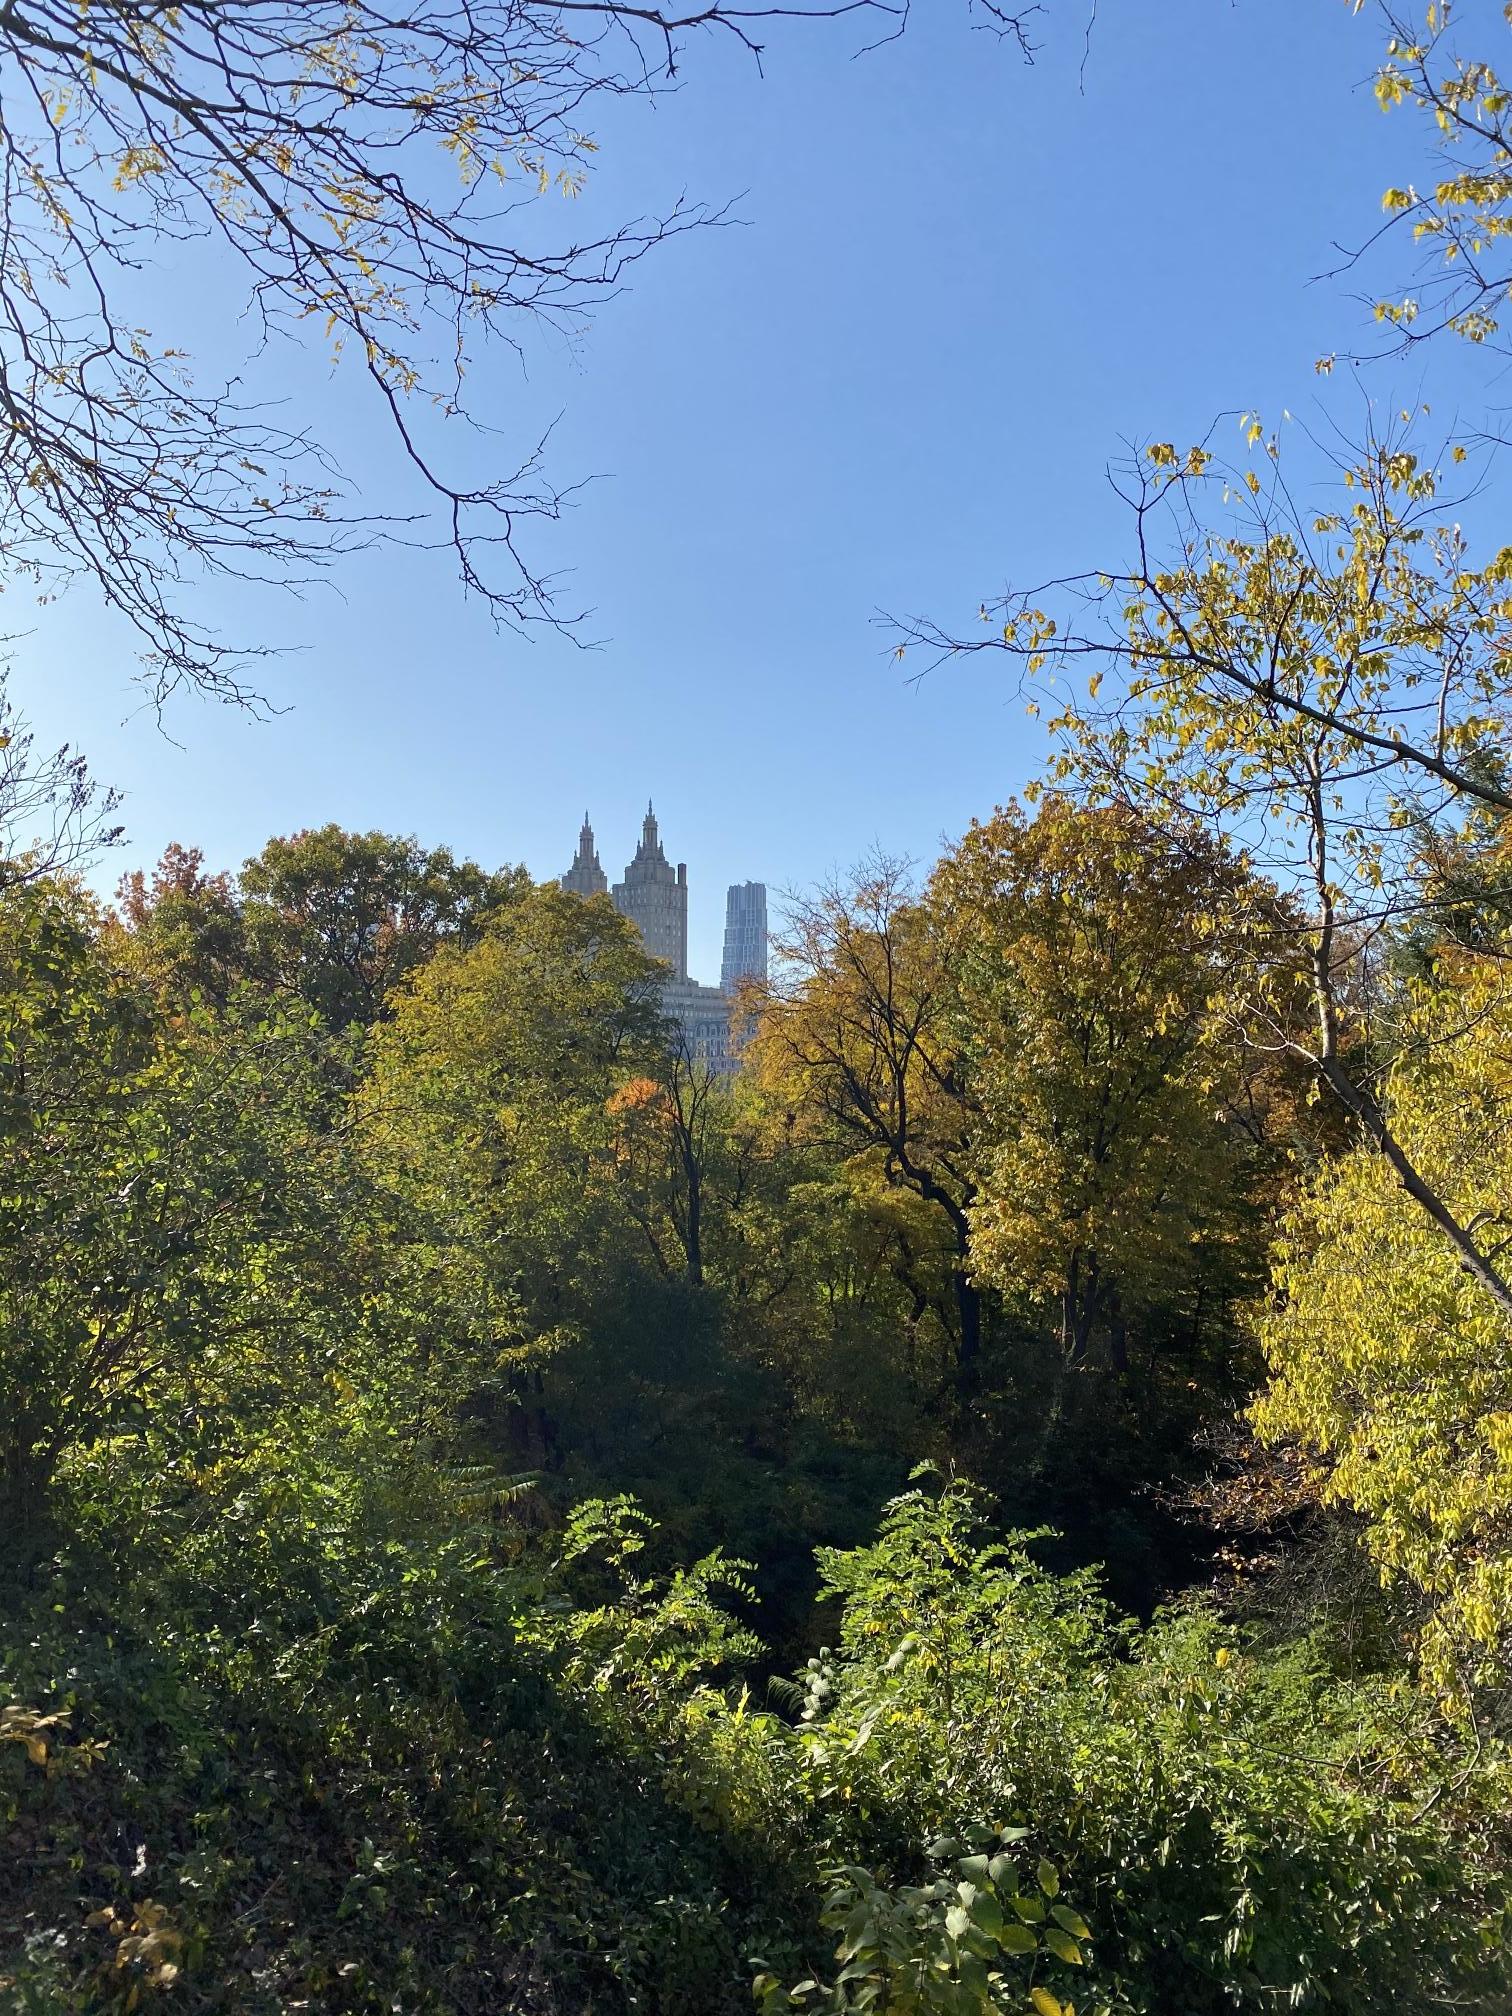 A blessed and beautiful day in Central Park